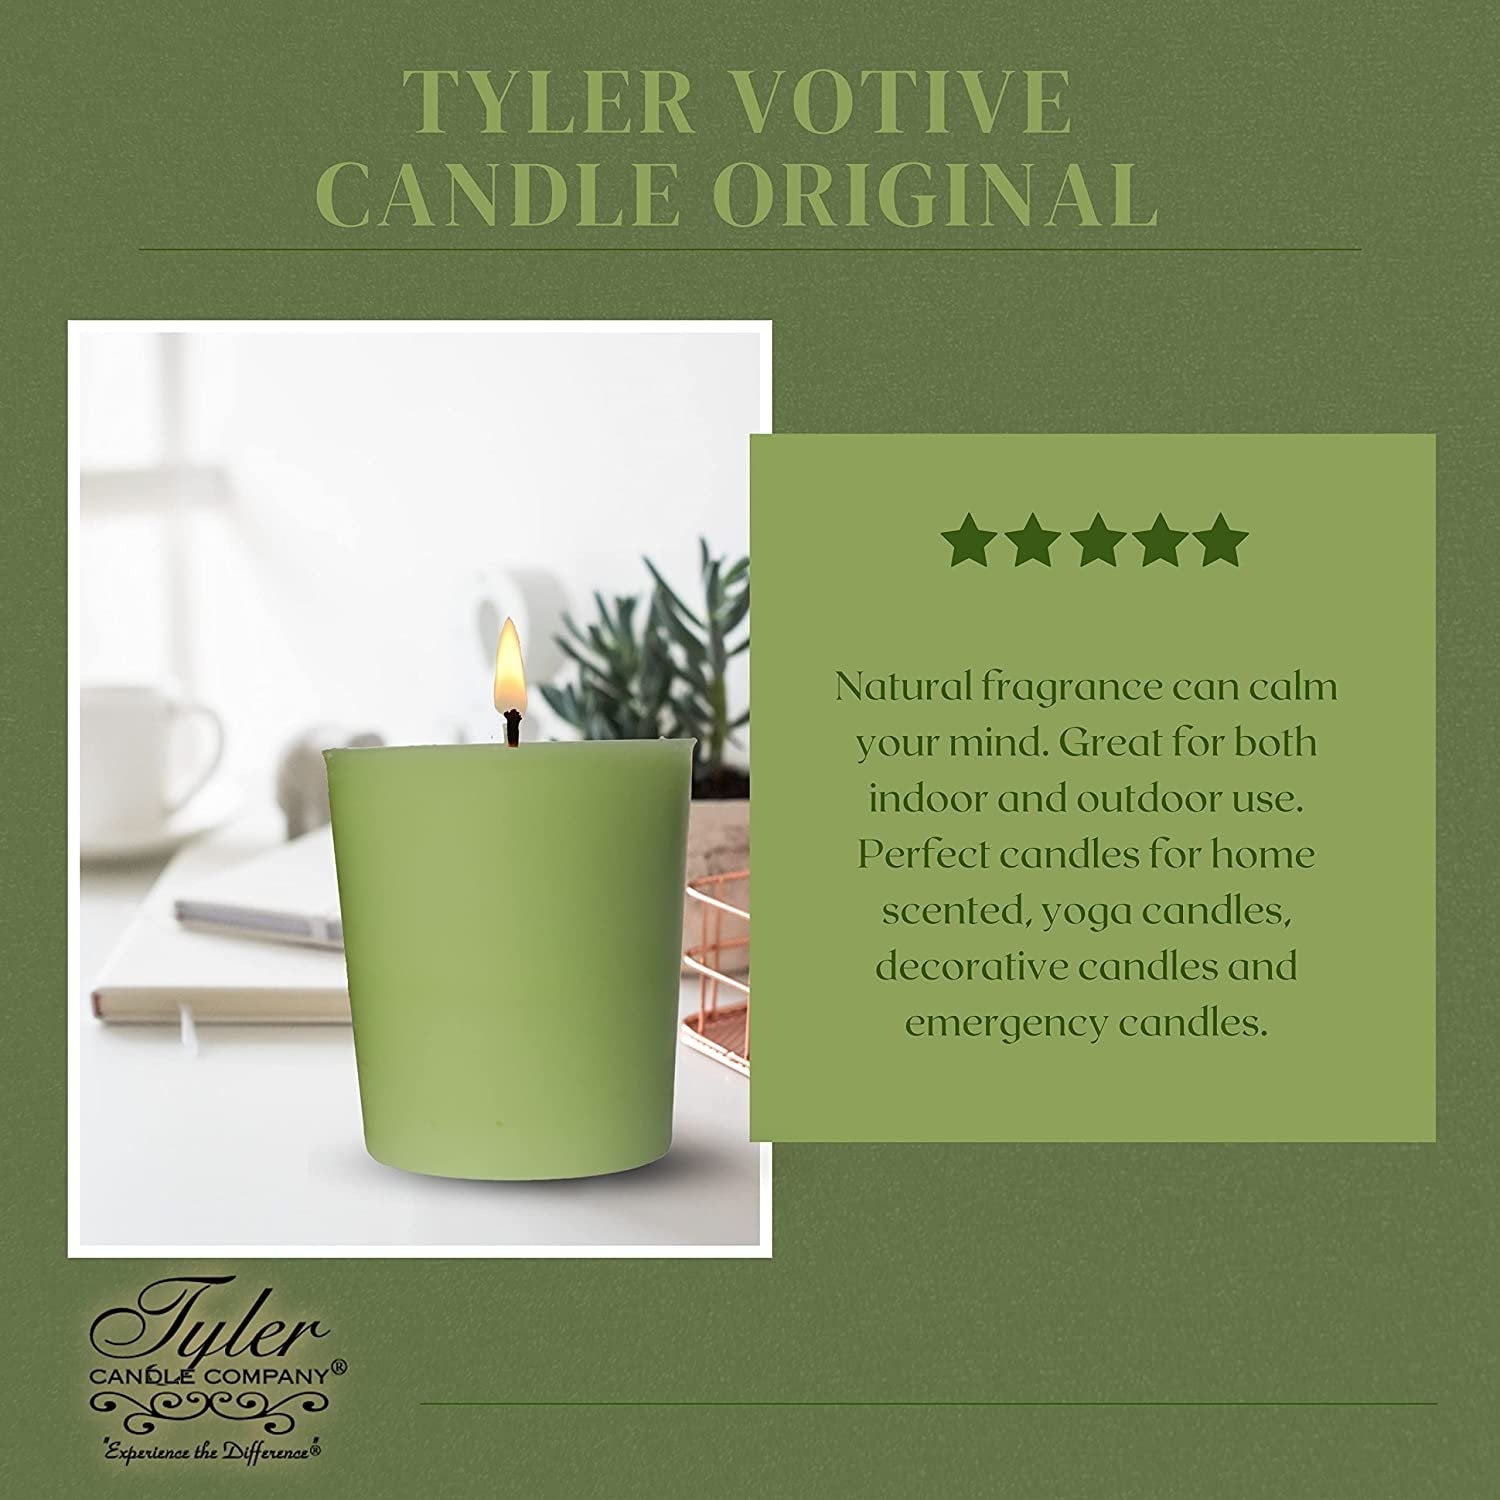 Tyler Candle Company Original Votive Candles - Luxury Scented Candle with Essential Oils - 4 Pack of 2 oz Small Candles with 15 Hour Burn Time Each - Bonus Worldwide Nutrition Multi Purpose Key Chain